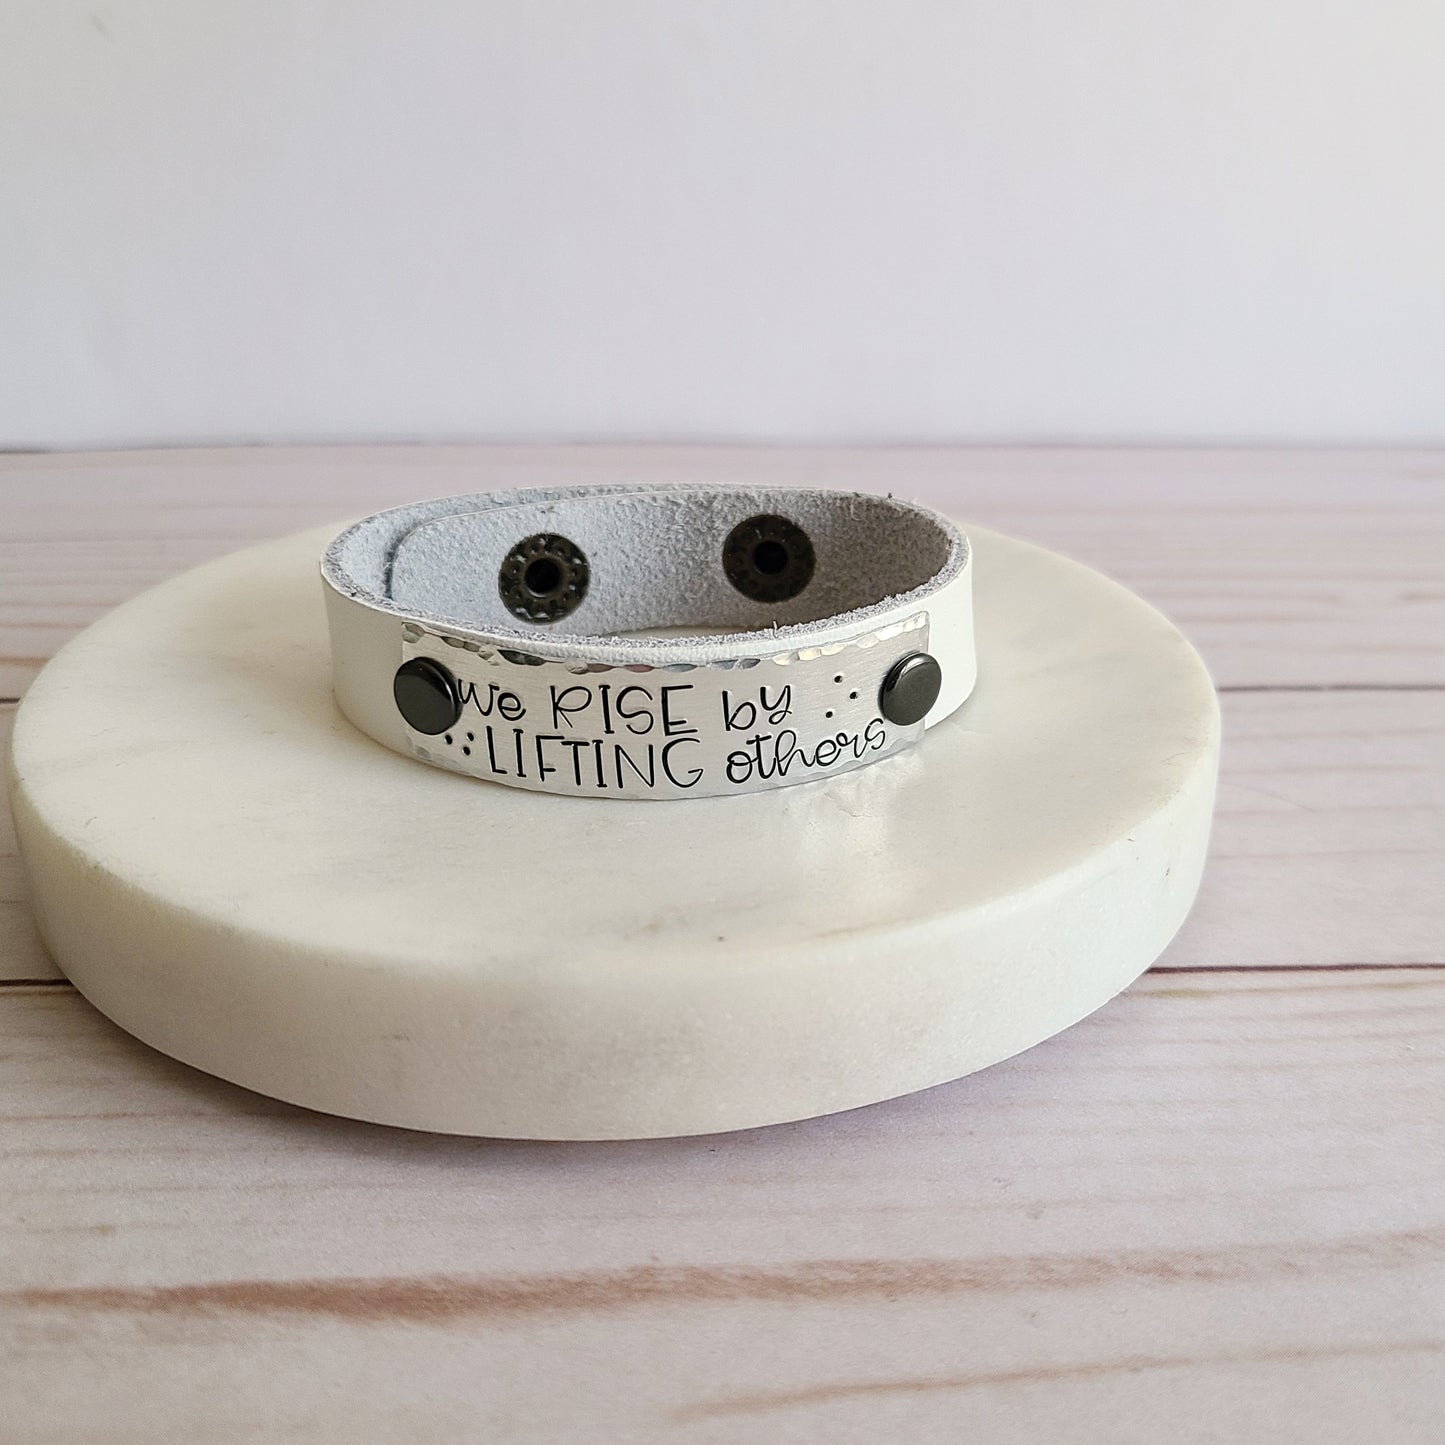 We Rise By Lifting Others - White Leather Cuff Bracelet